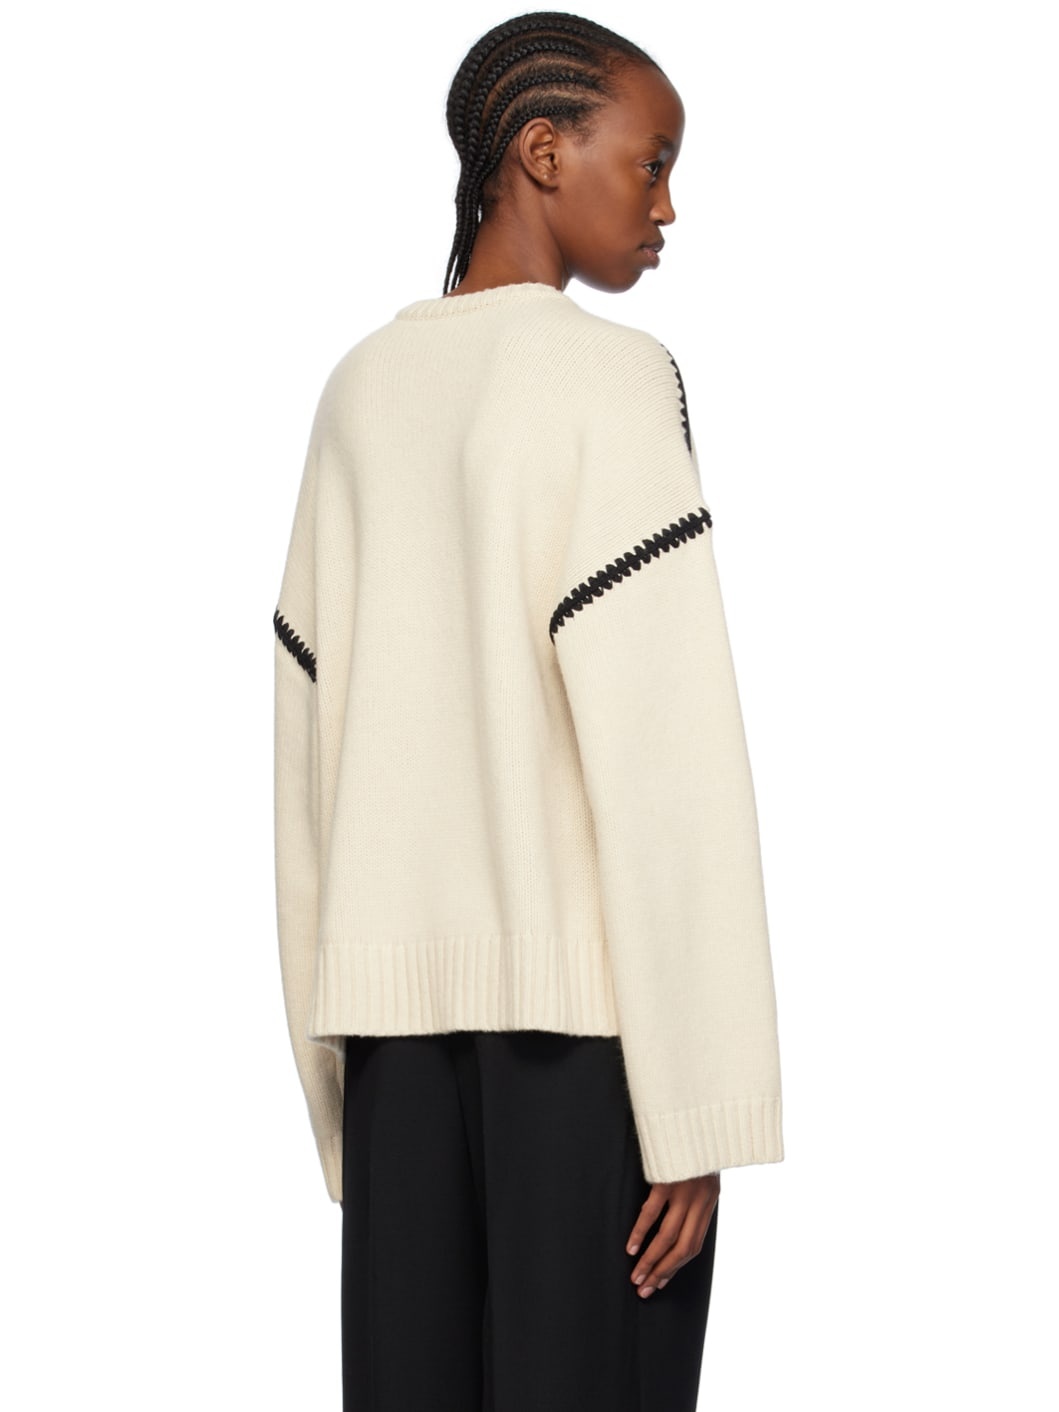 Off-White Embroidered Sweater - 3